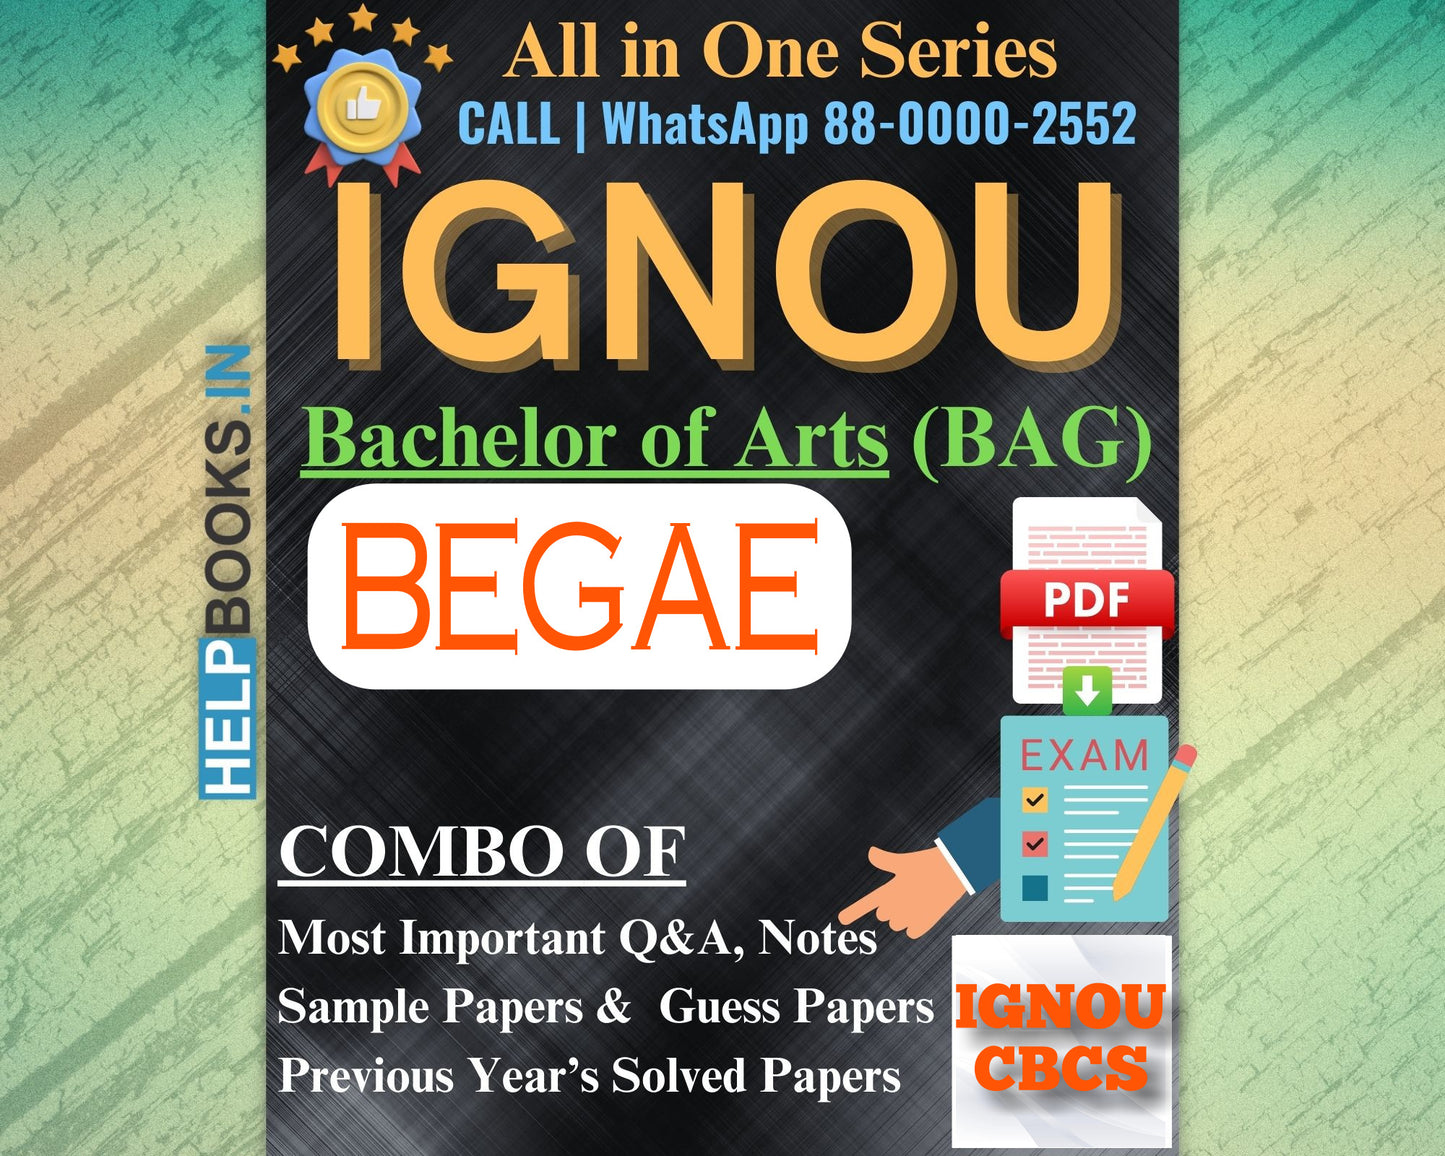 IGNOU BAG Online Study Package: Bachelor of Arts (BA) - Previous Years Solved Papers, Q&A, Exam Notes, Sample Papers, Guess Papers-BEGAE182